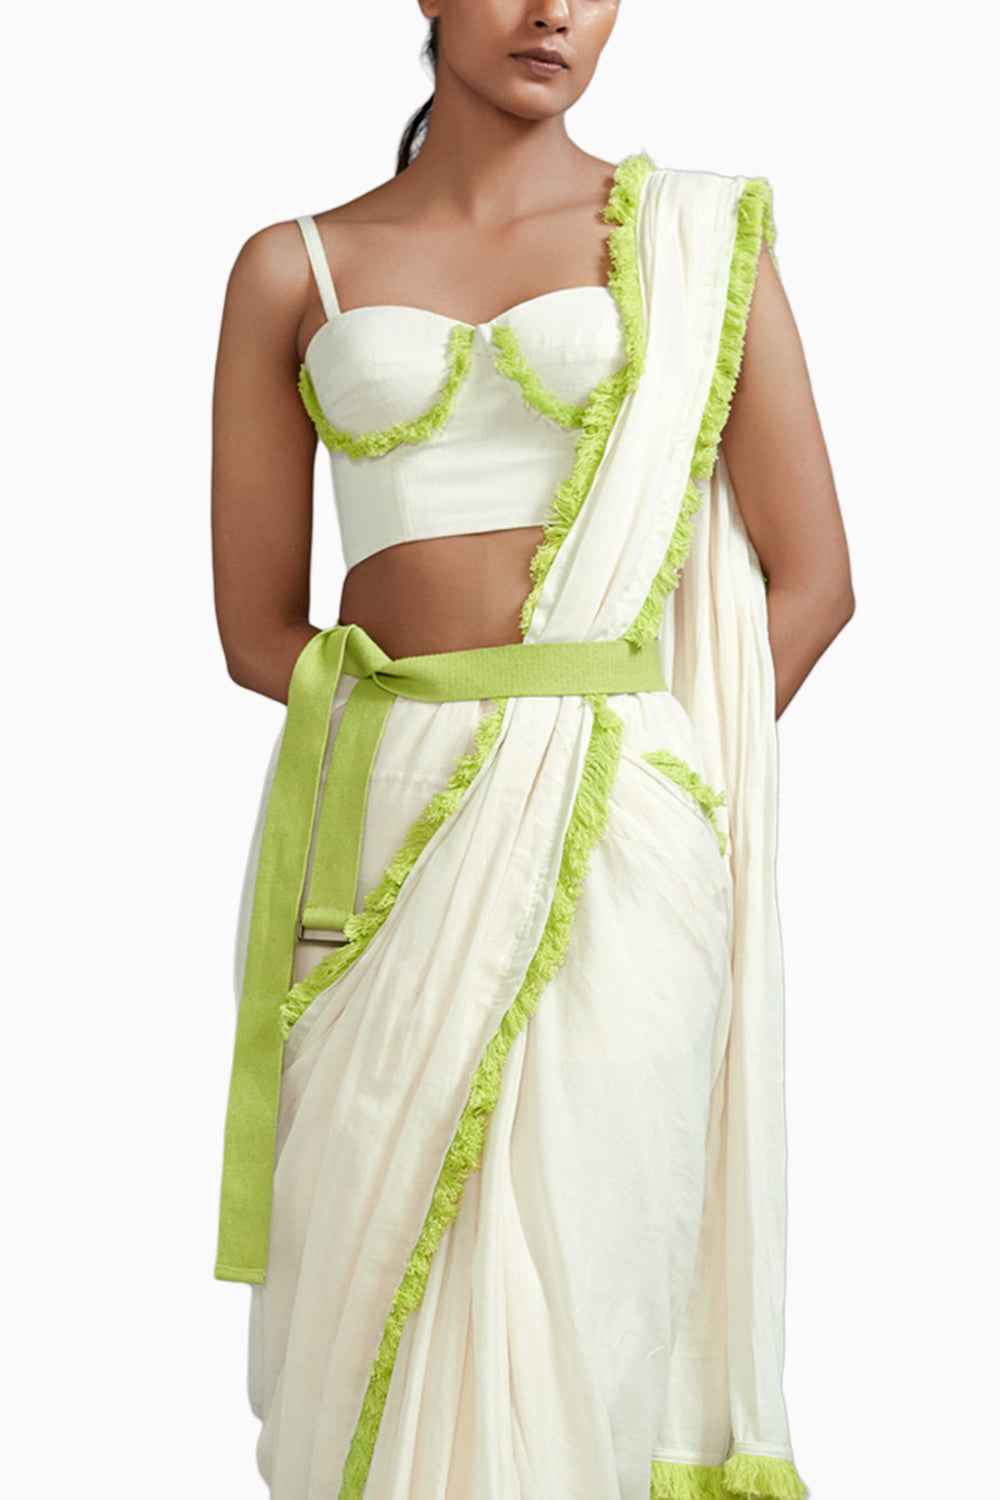 Off-White With Neon Green Saree & Fringed Corset Set